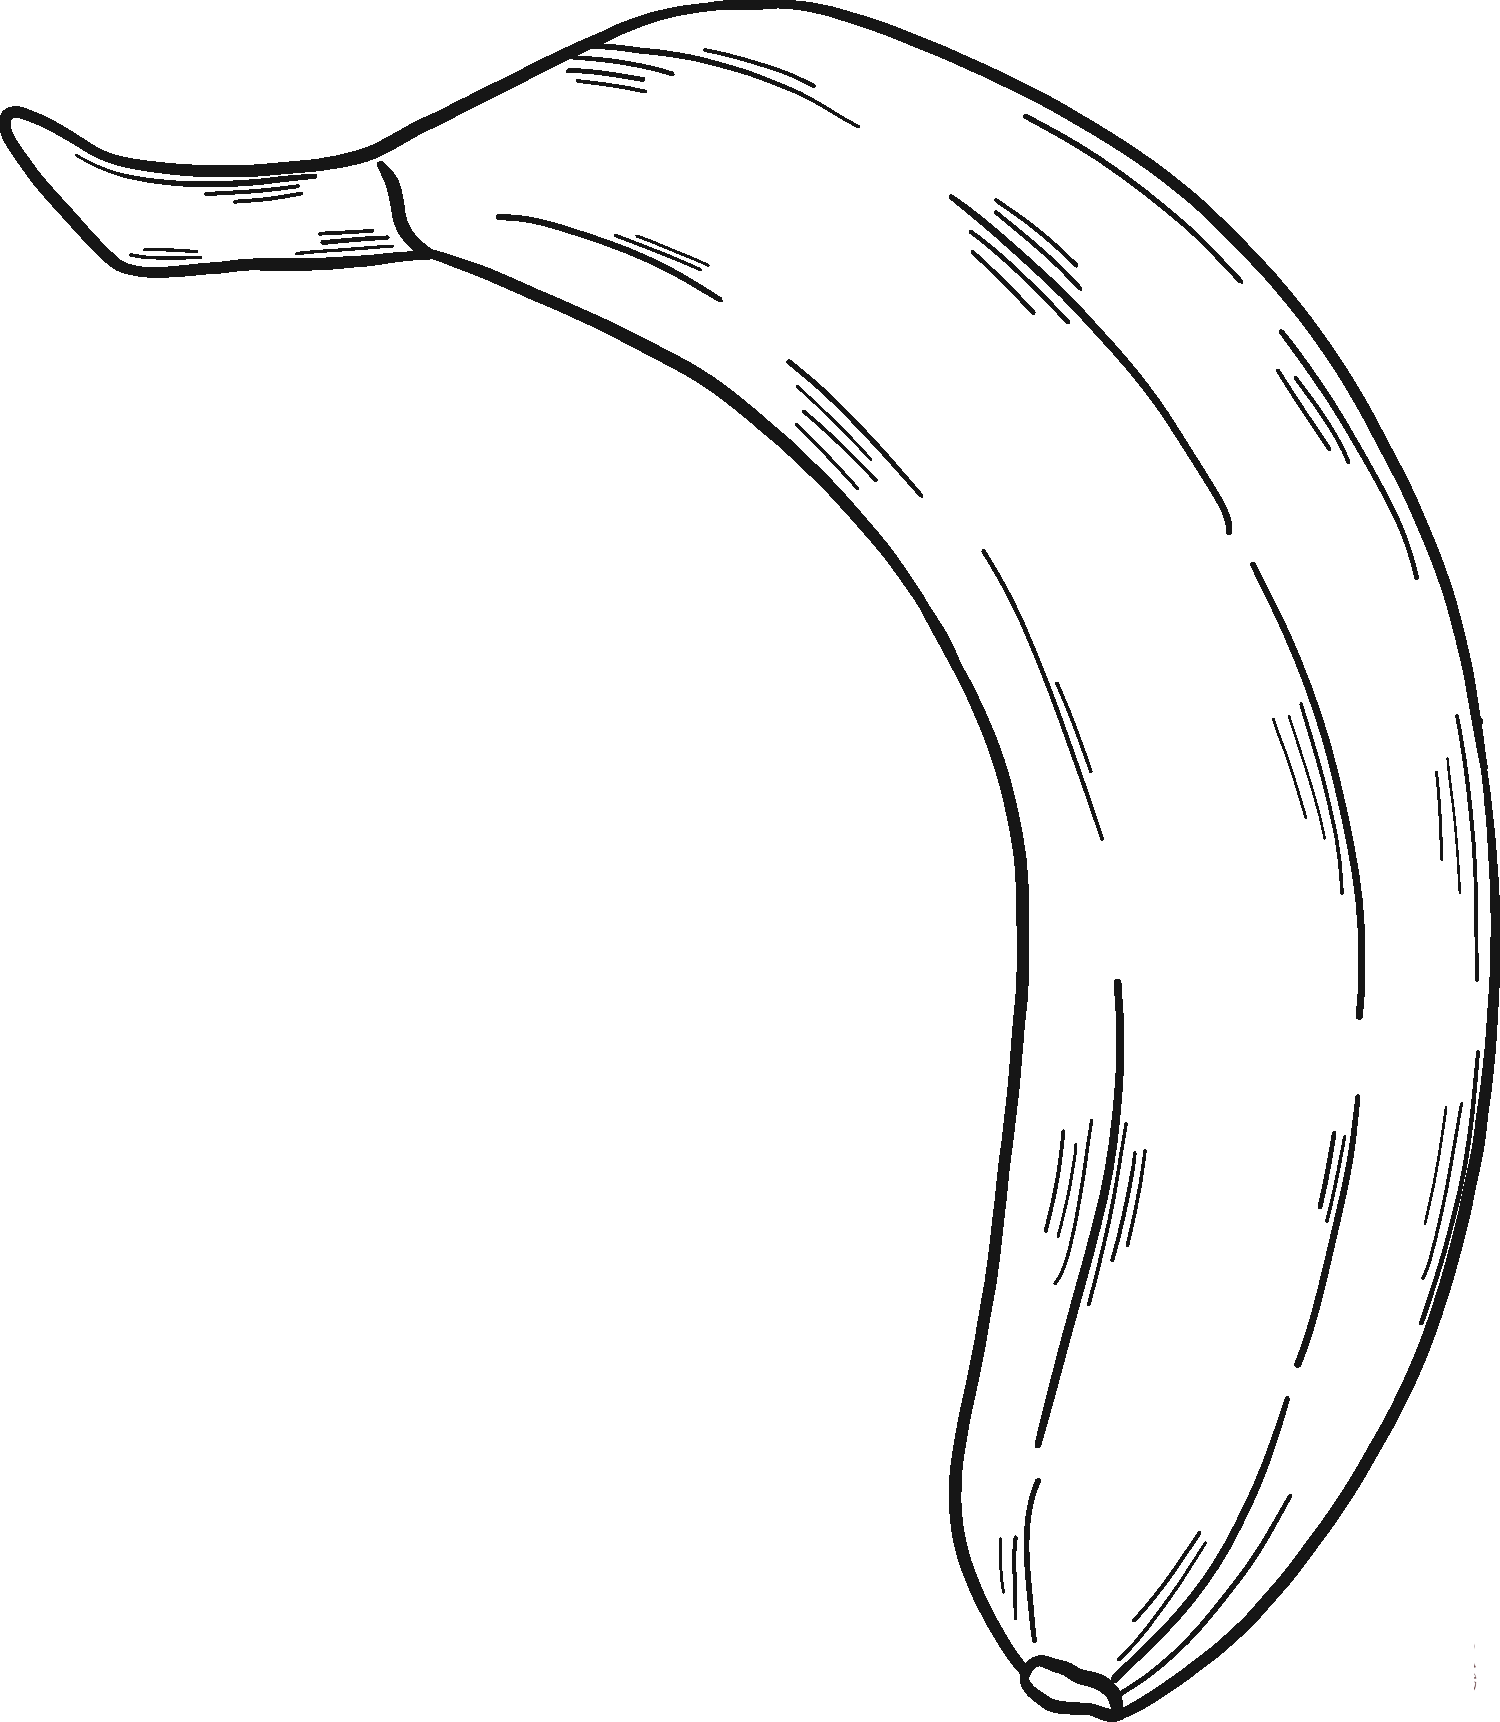 A banana Coloring Page For Kids